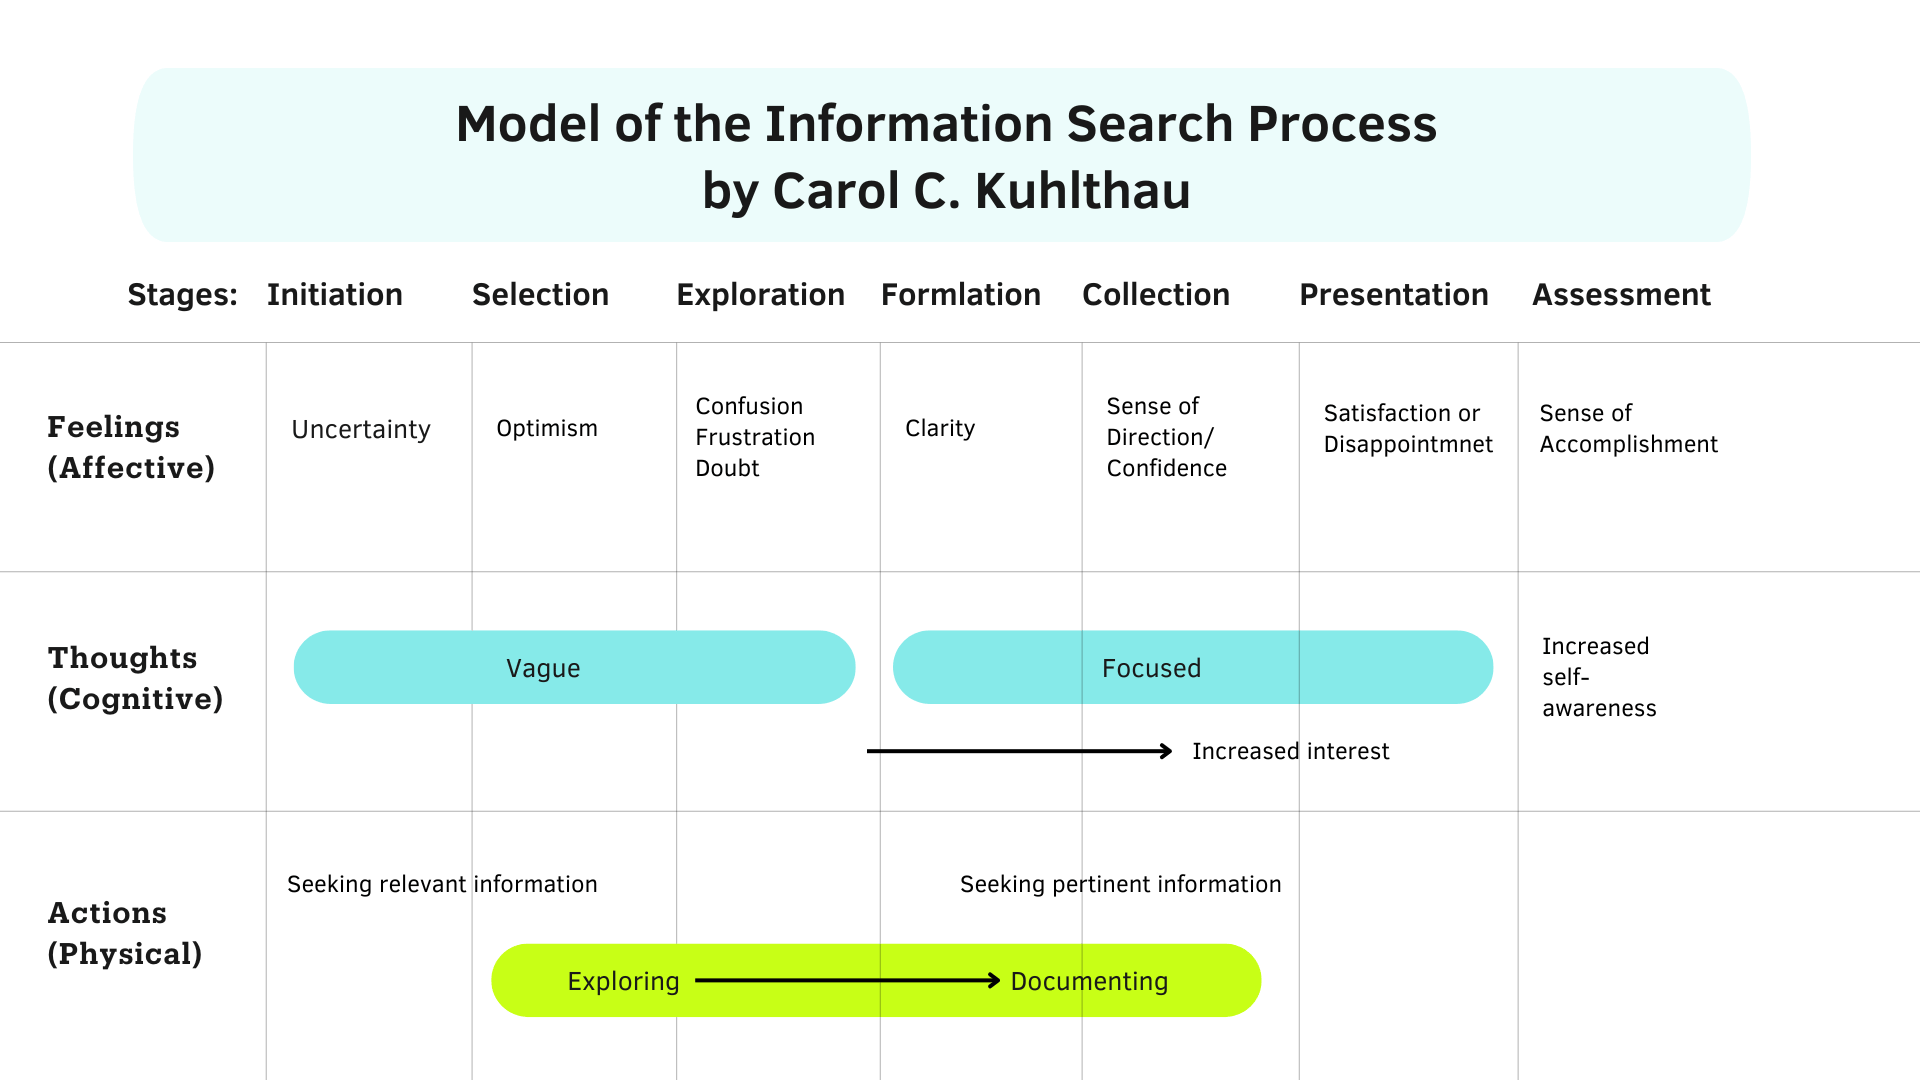 Graph of Kuhlthau's Model of the Information Search Process, as described in text.